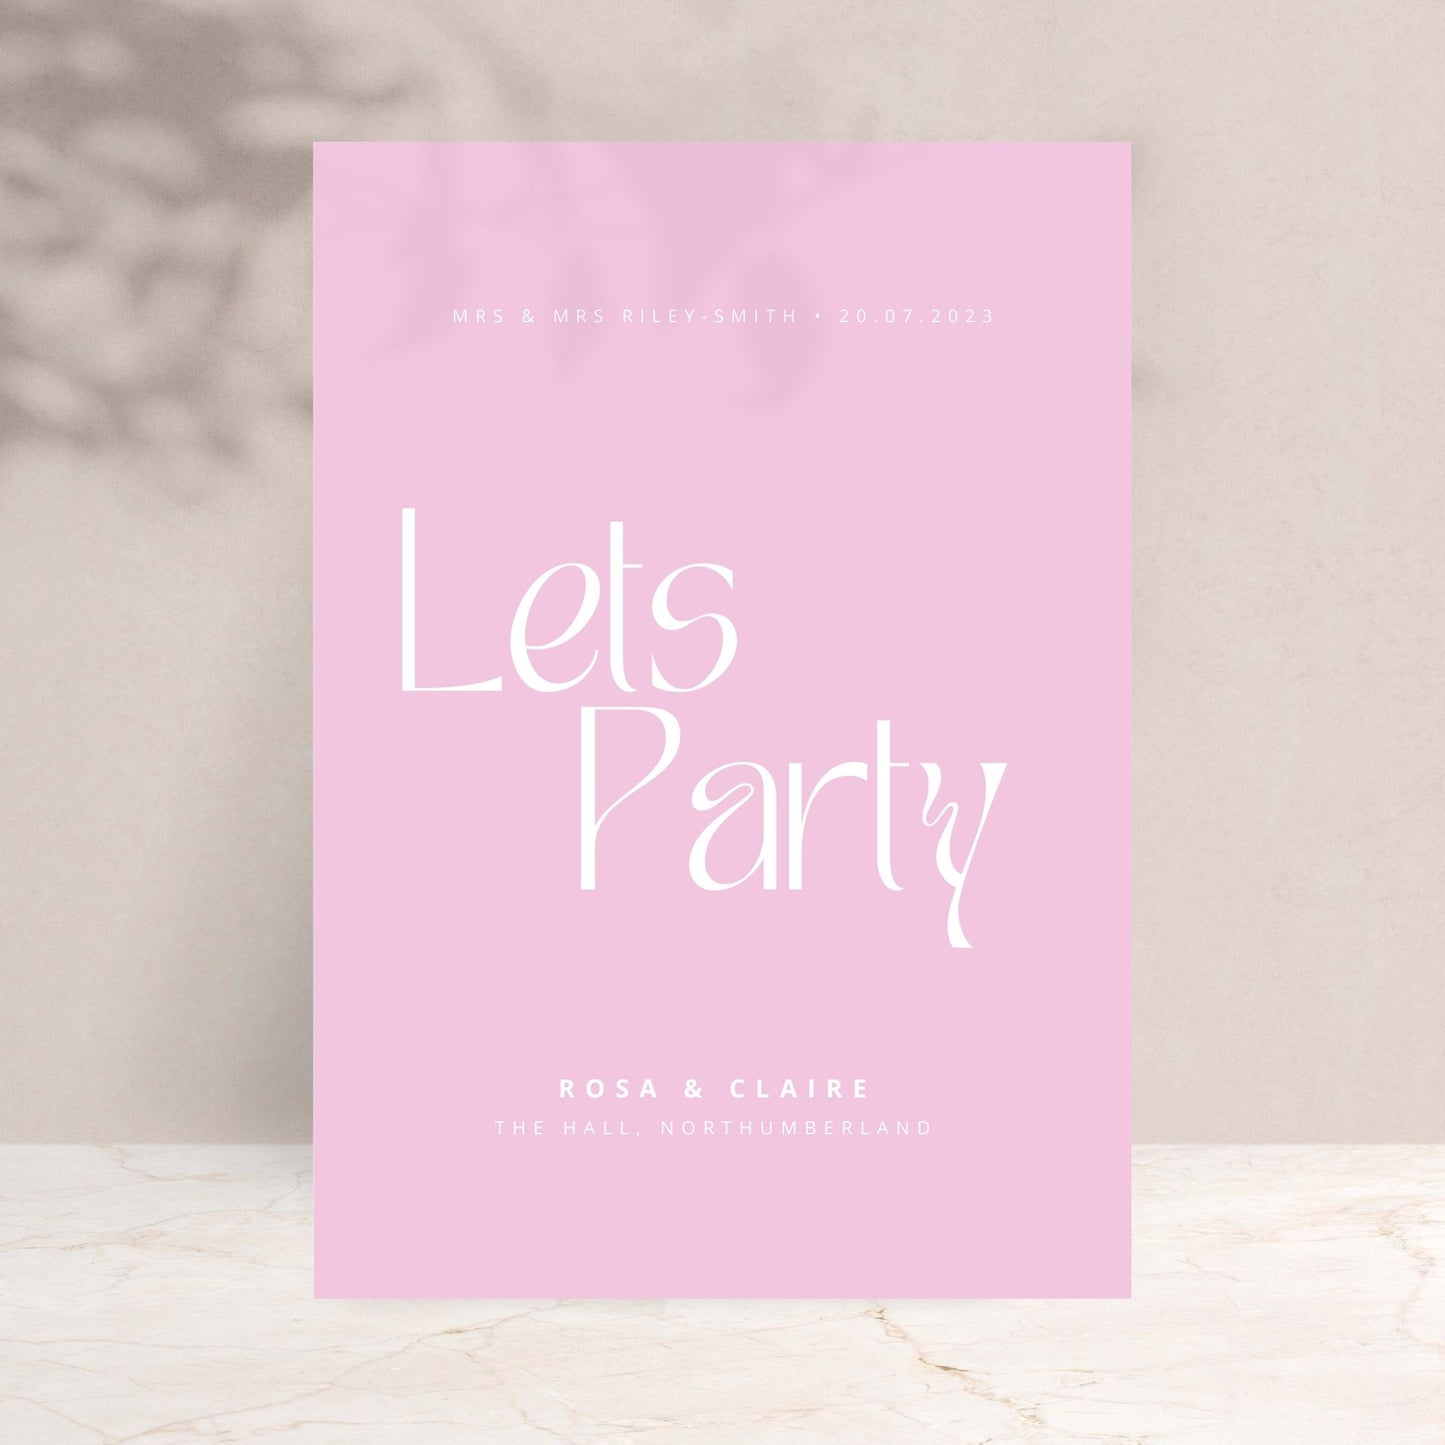 ROSA Let's Party Wedding Welcome Sign - Wedding Ceremony Stationery available at The Ivy Collection | Luxury Wedding Stationery